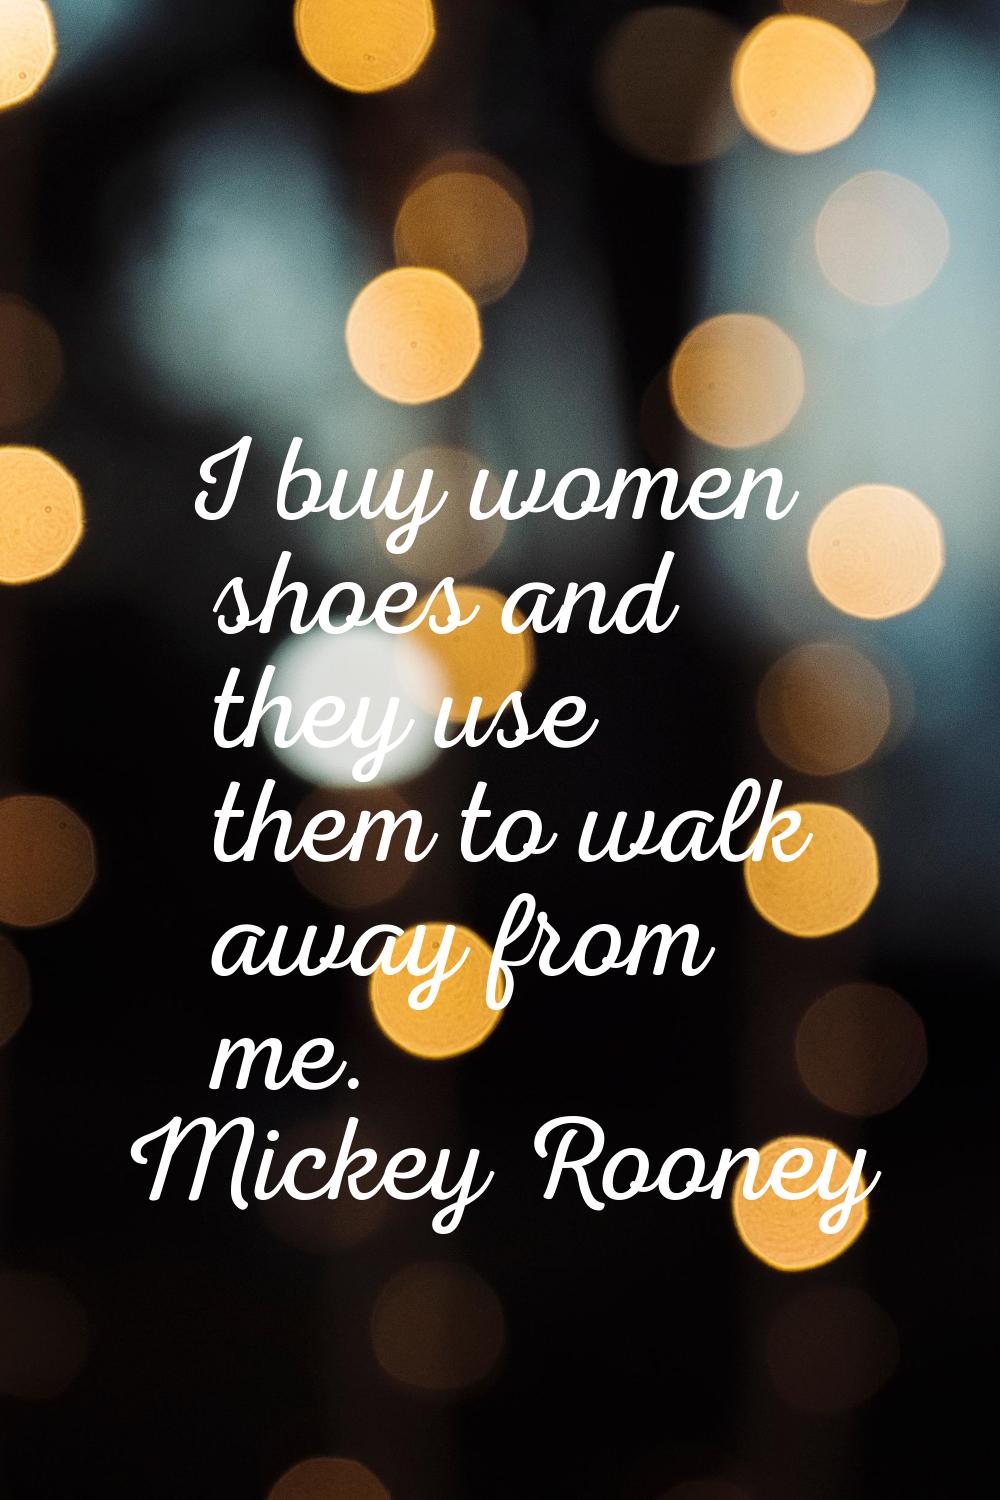 I buy women shoes and they use them to walk away from me.